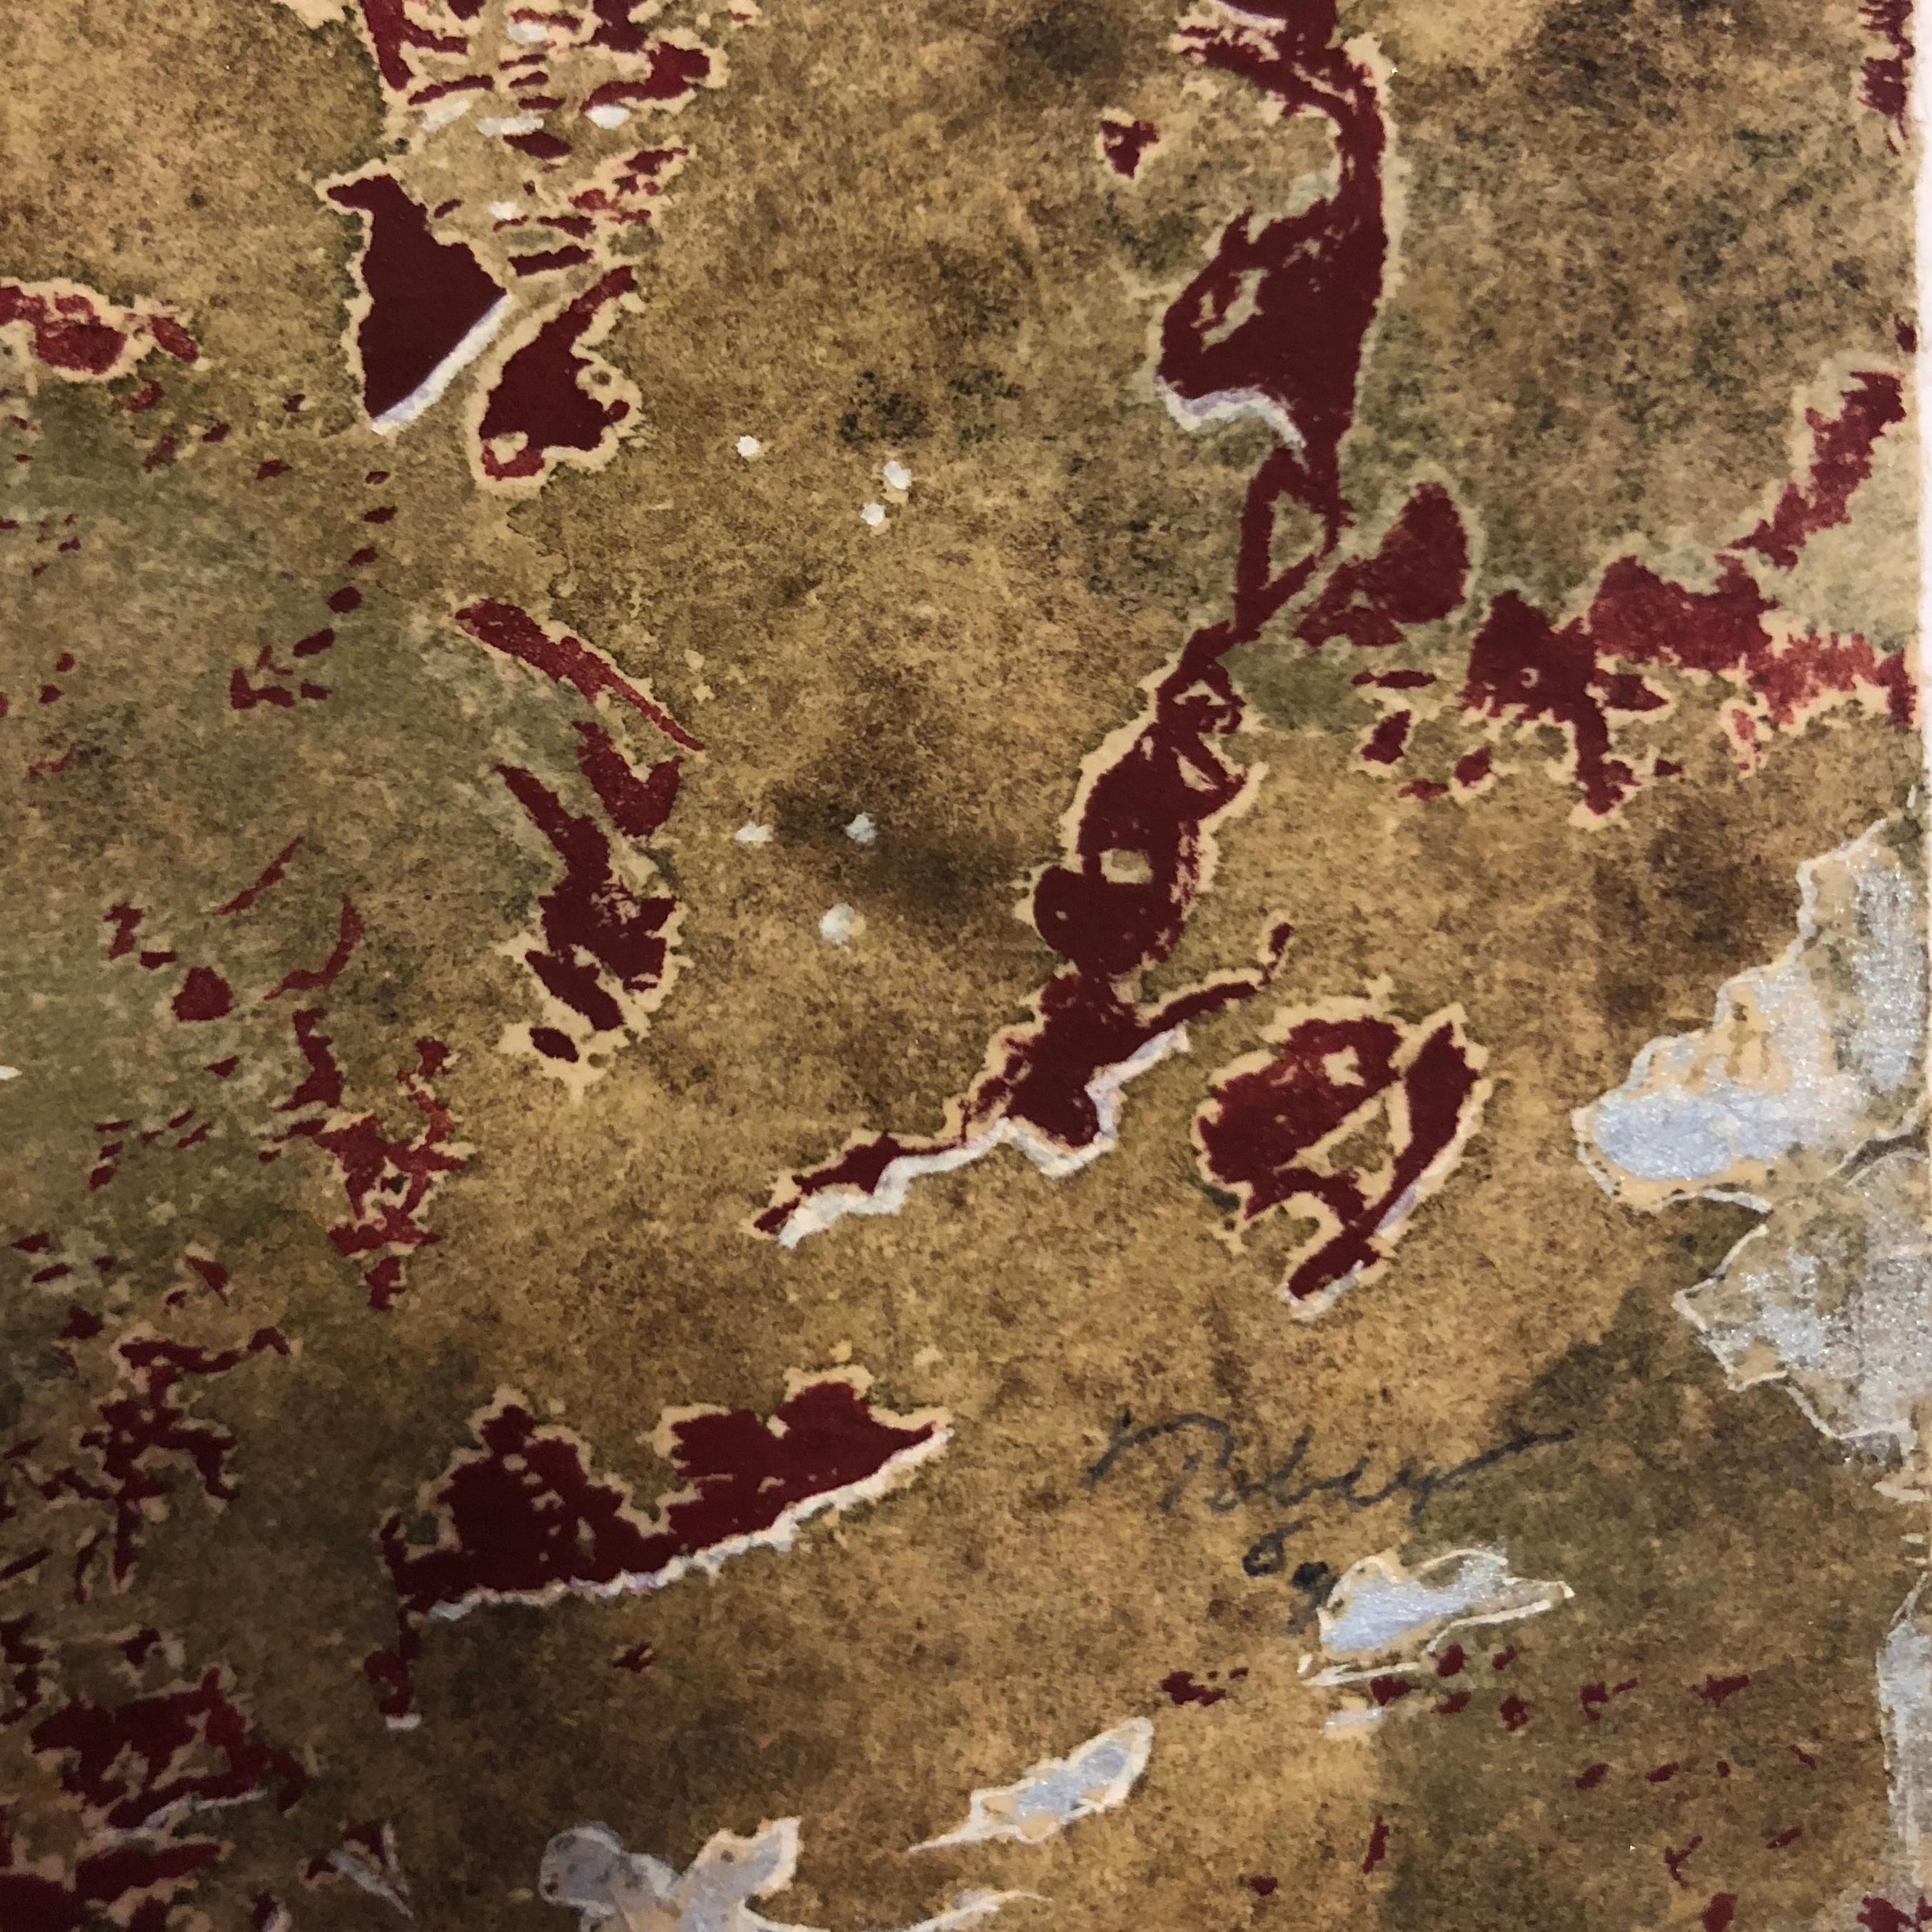 Untitled is an artwork by Mark Tobey. Monotype with tempera, heightened with tempera on Japan paper.
Hand signed and dated lower right: Tobey 69.
Provenance: Henze Ketterer Gallery
Bibliography: Catalogue Modern Kunst 18 Galleria Henze,